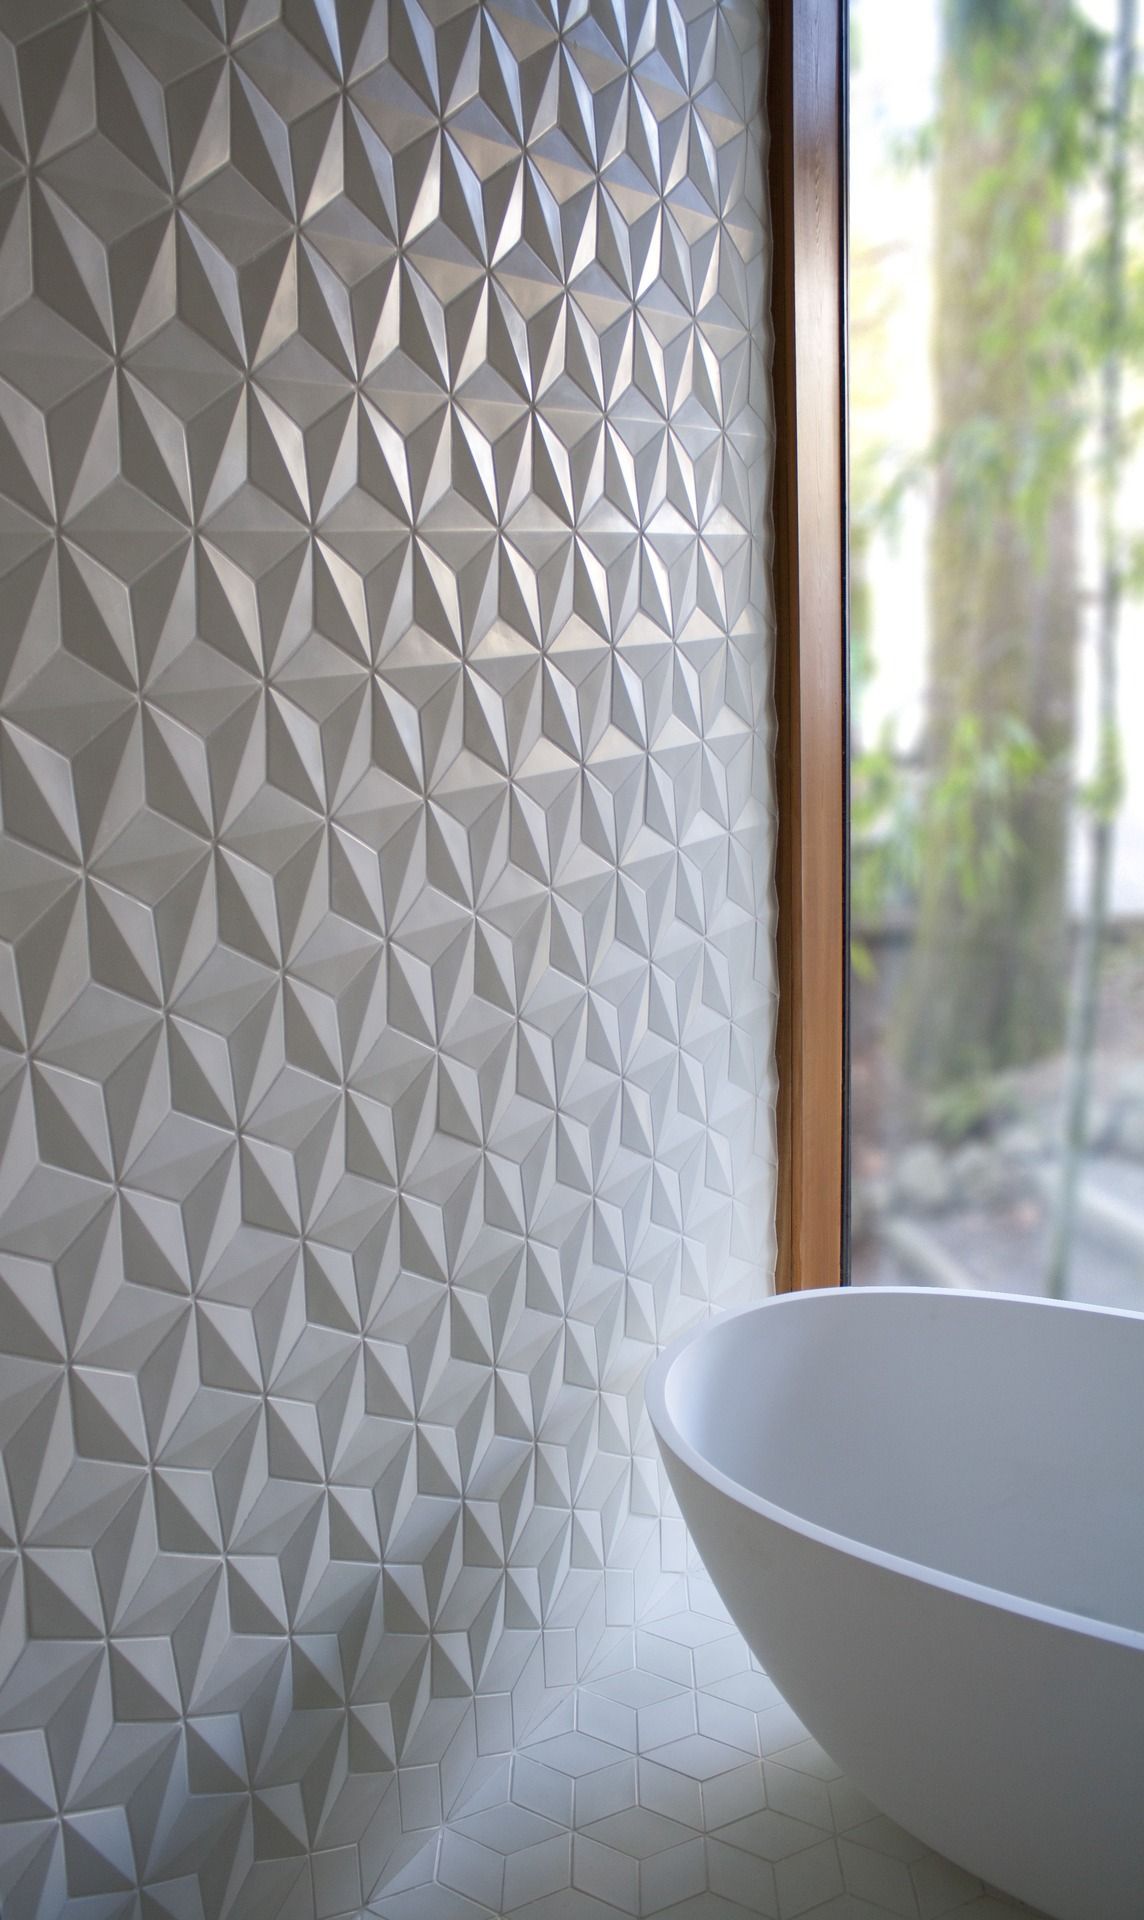 Textured bathroom tiles can create an incredible effect in the bathroom like it has in this one.